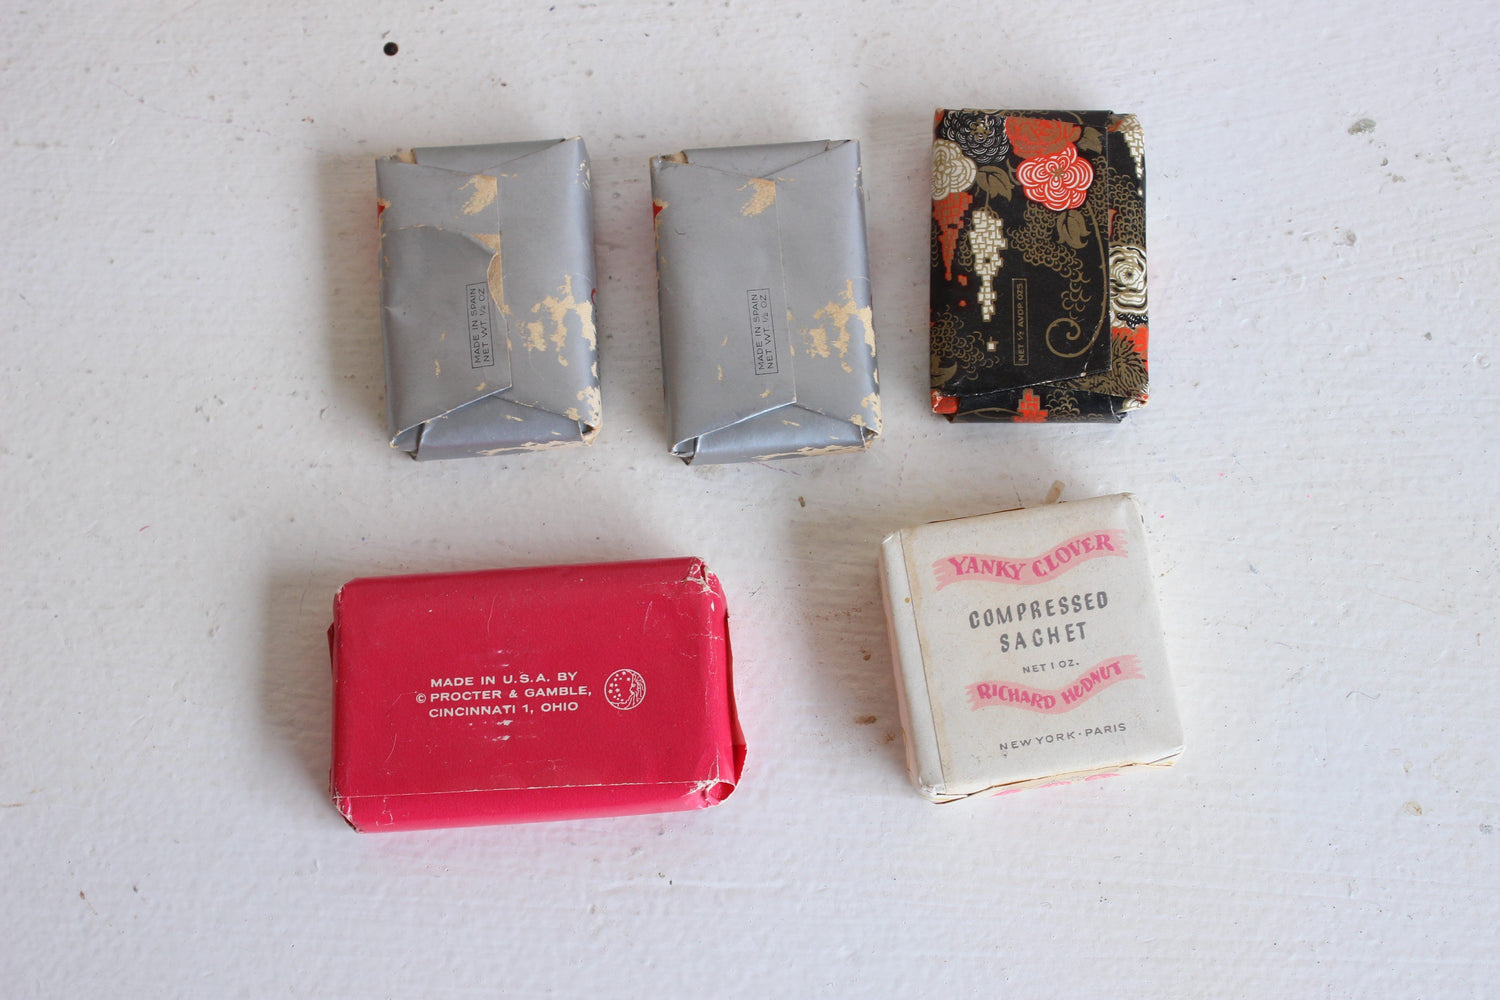 Vintage 1950s Travel Soaps ( and a sachet too!)